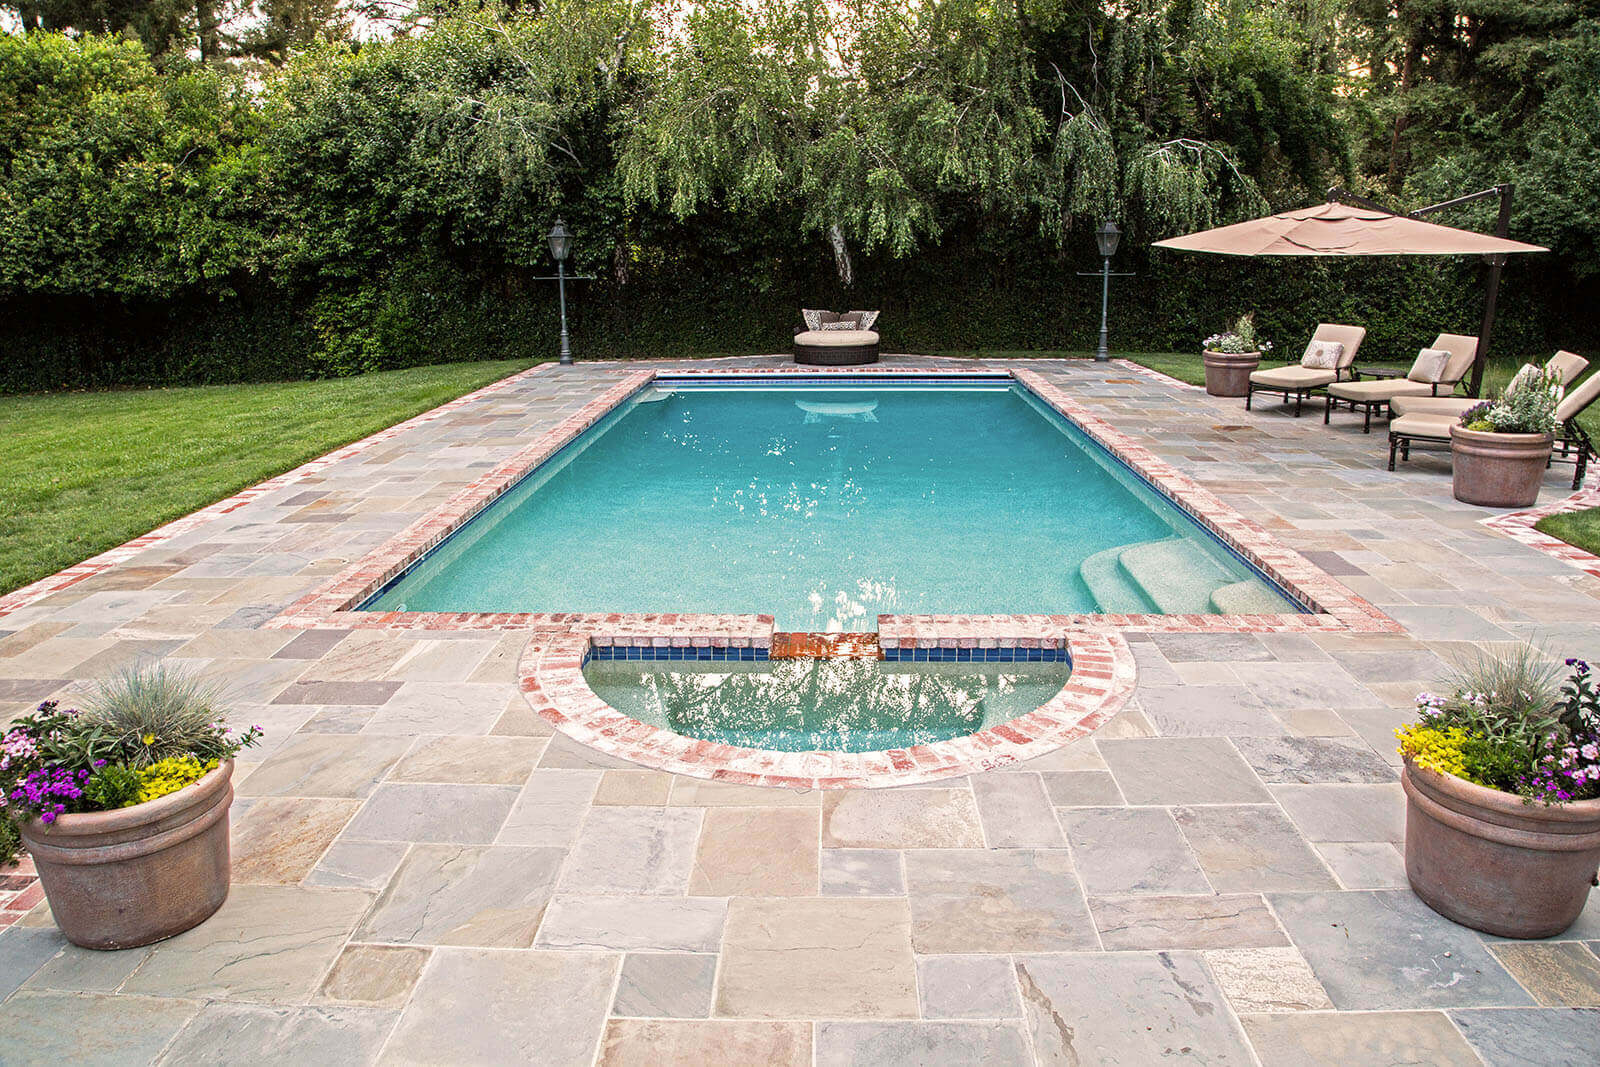 Medium-sized brick-lined aquamarine swimming pool with nearby lounging areas on slate stone tiling under tan pyramid umbrellas